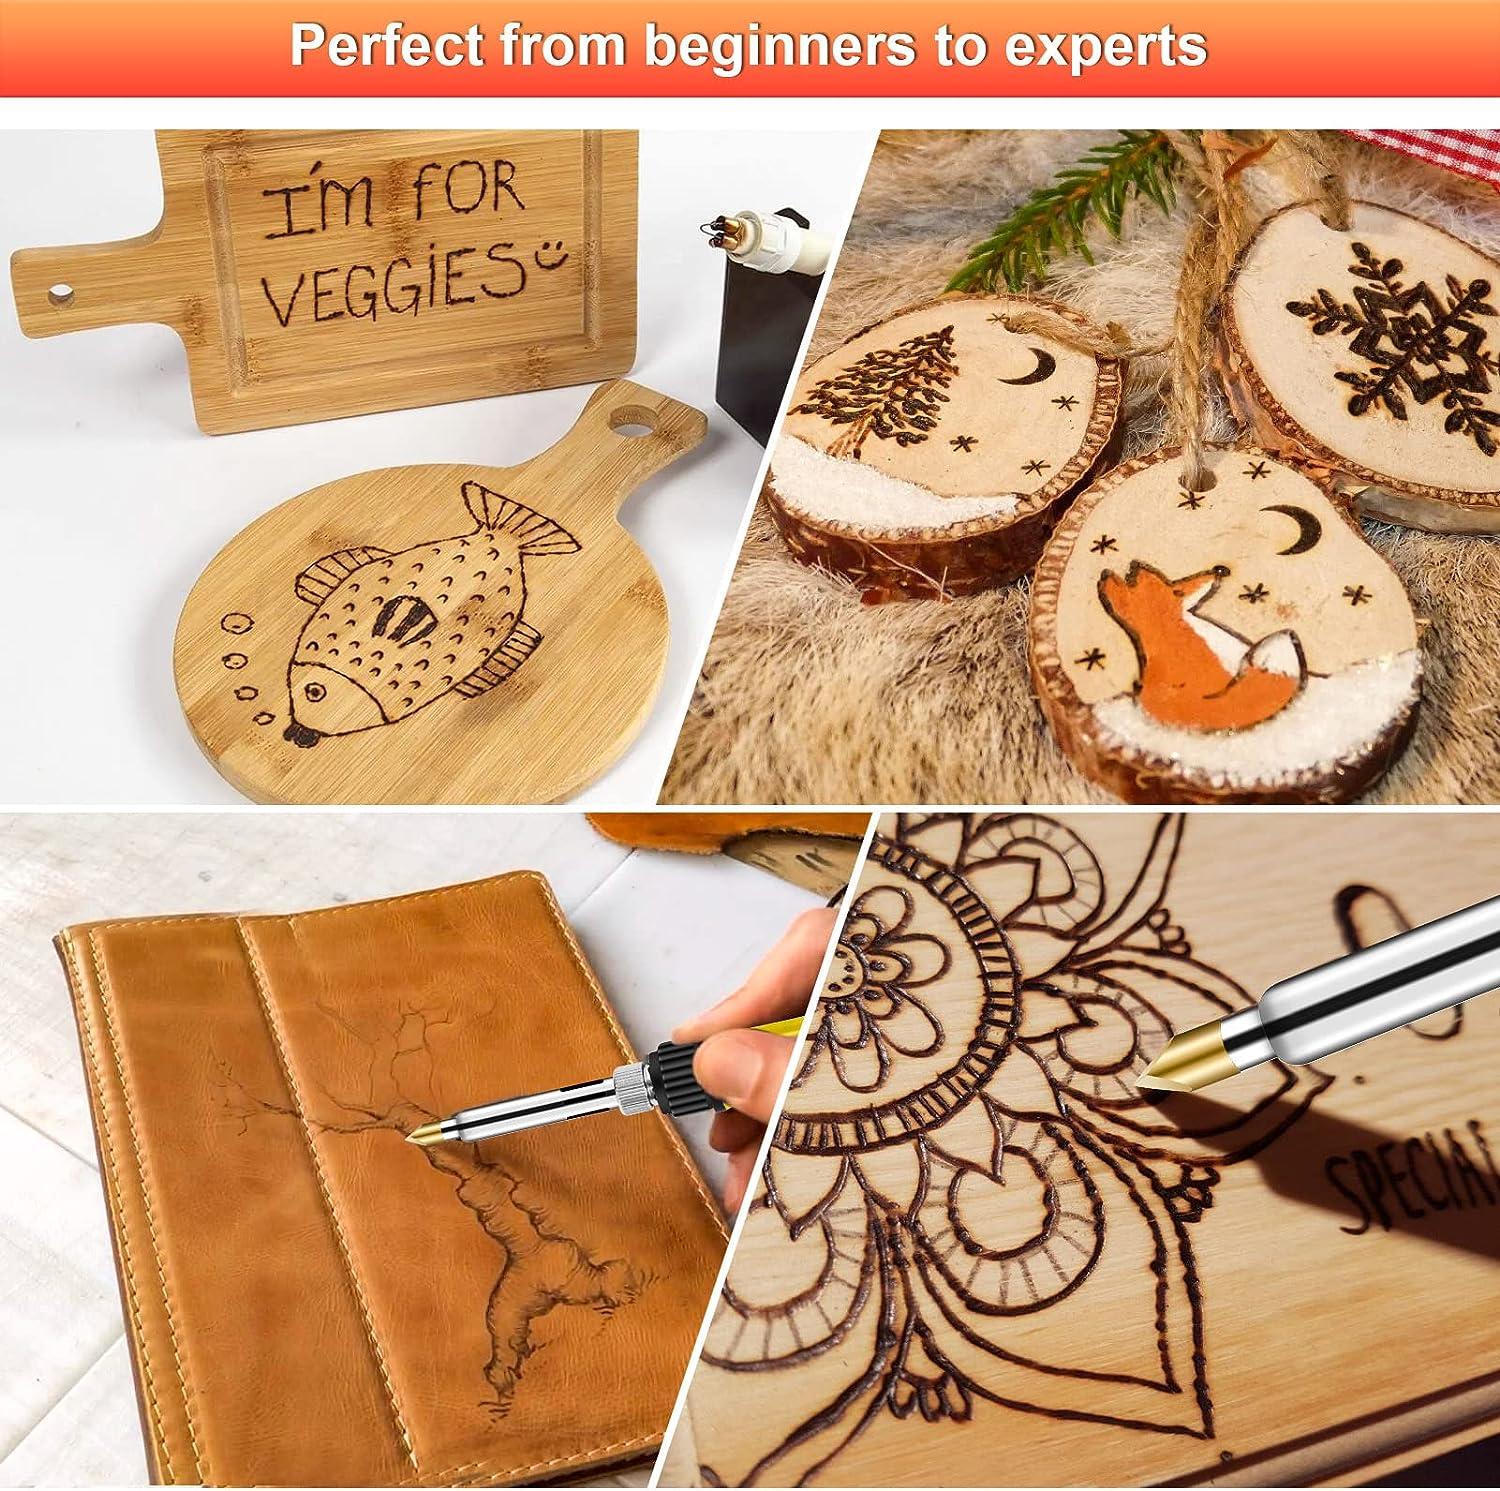 How To Use A Wood Burning Kit 